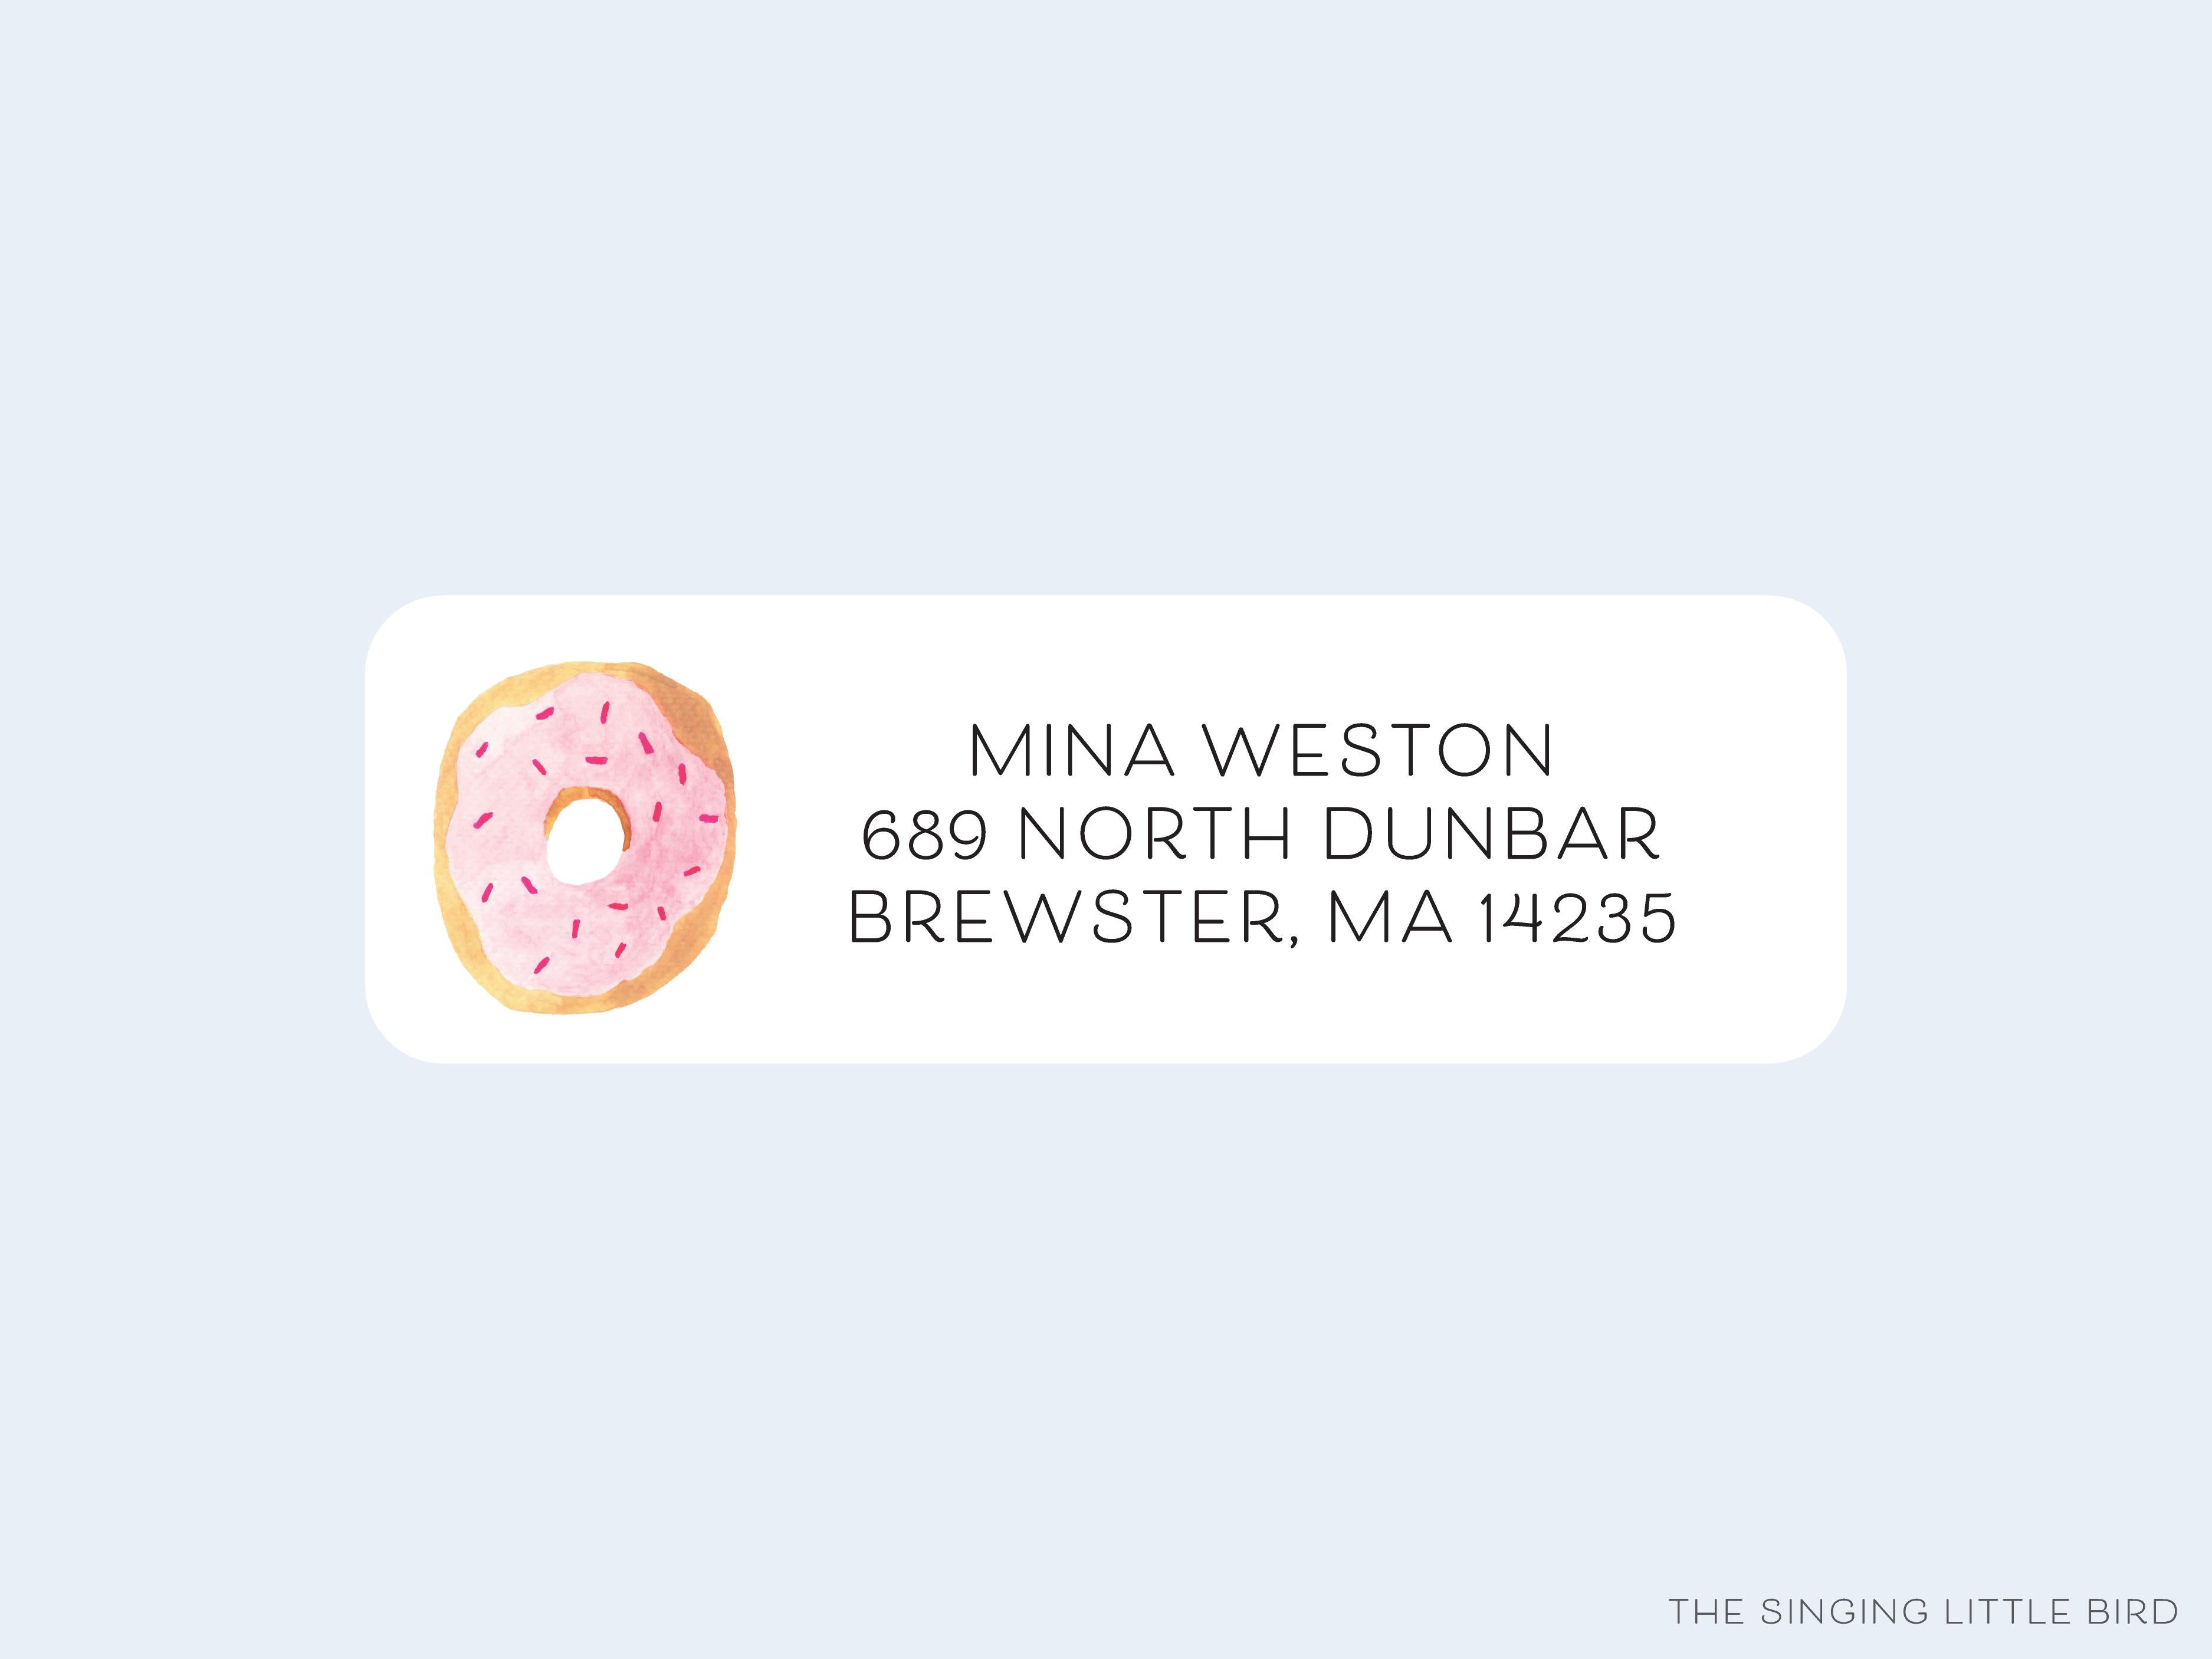 Donut Return Address Labels- These personalized return address labels are 2.625" x 1" and feature our hand-painted watercolor donut, printed in the USA on beautiful matte finish labels. These make great gifts for yourself or the sweet tooth lover. -The Singing Little Bird